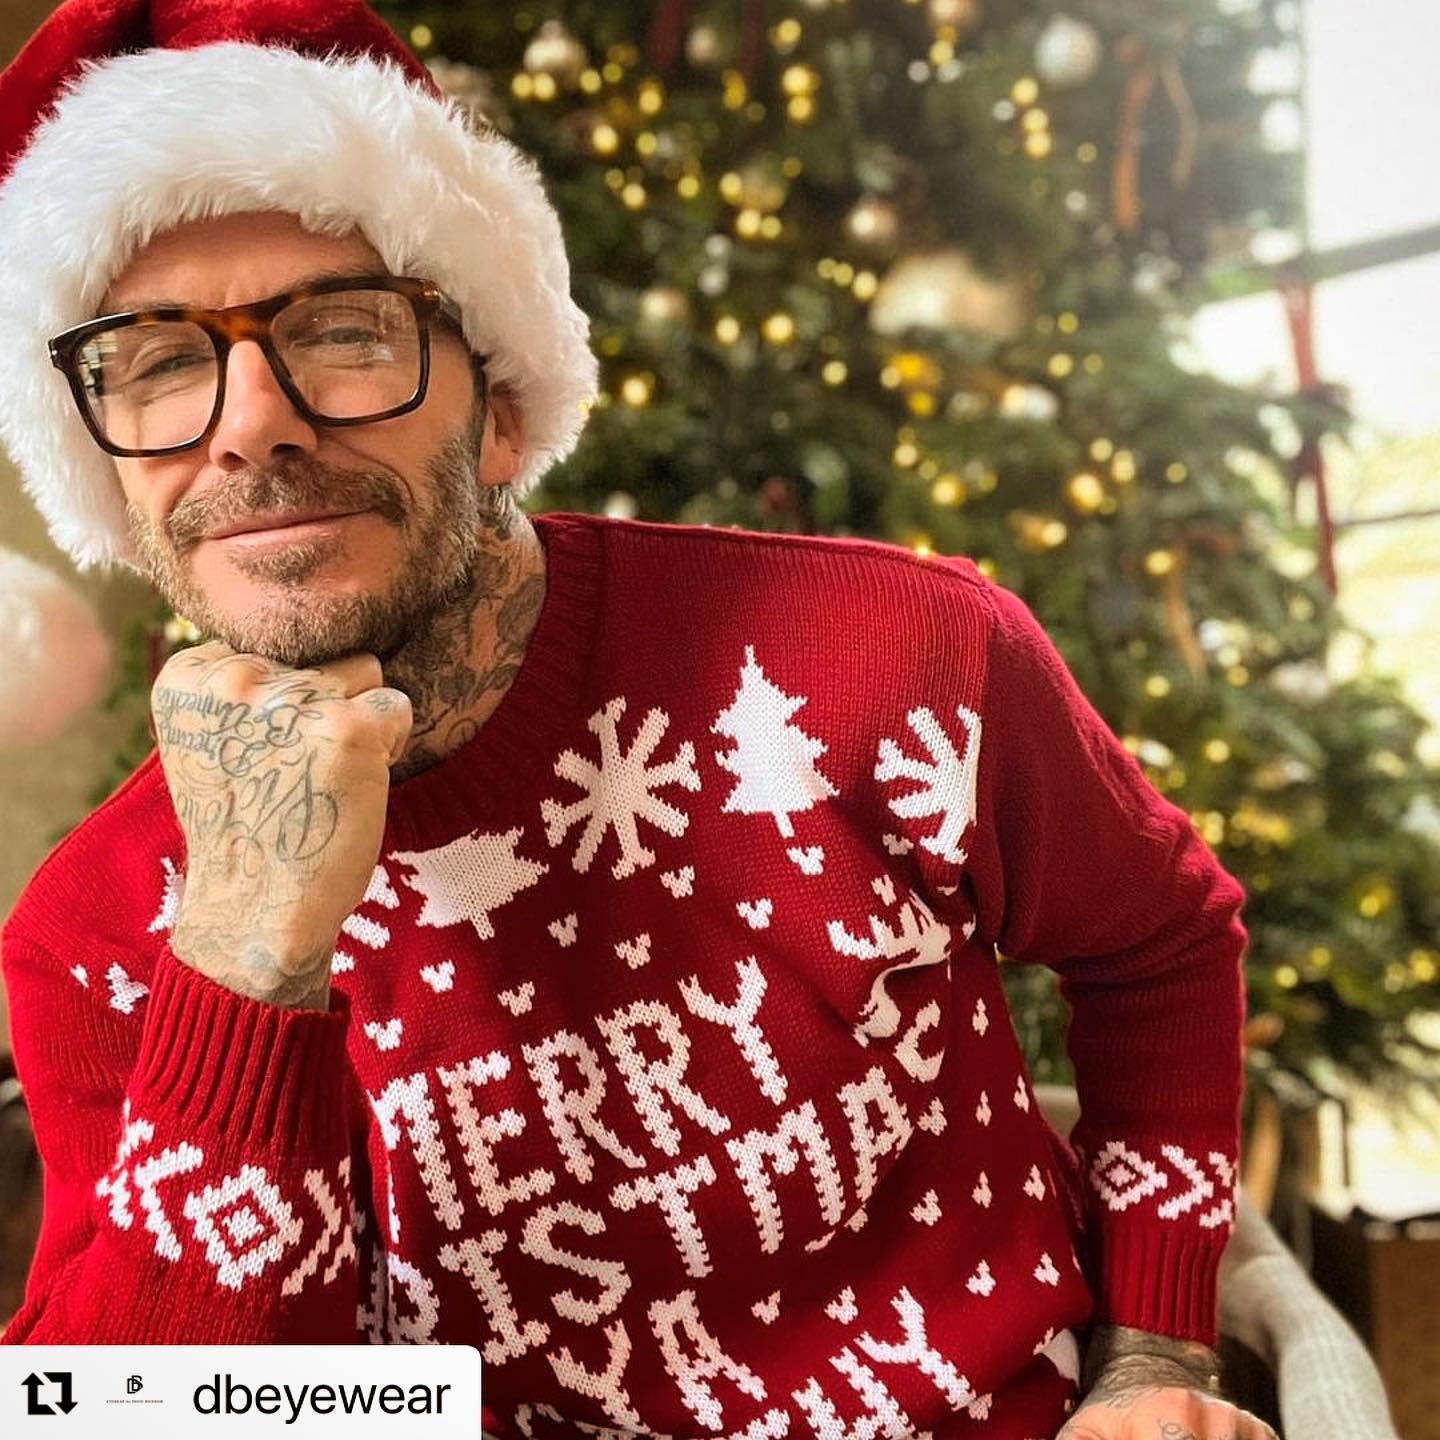 Merry (late) Christmas! ❤️🎄🎅🏻Yes, we are open from tomorrow! 💪🏻
@DavidBeckham #dbeyewear #menstyle #classy #eyewear #exlusively @optiekvanlindt #foryou